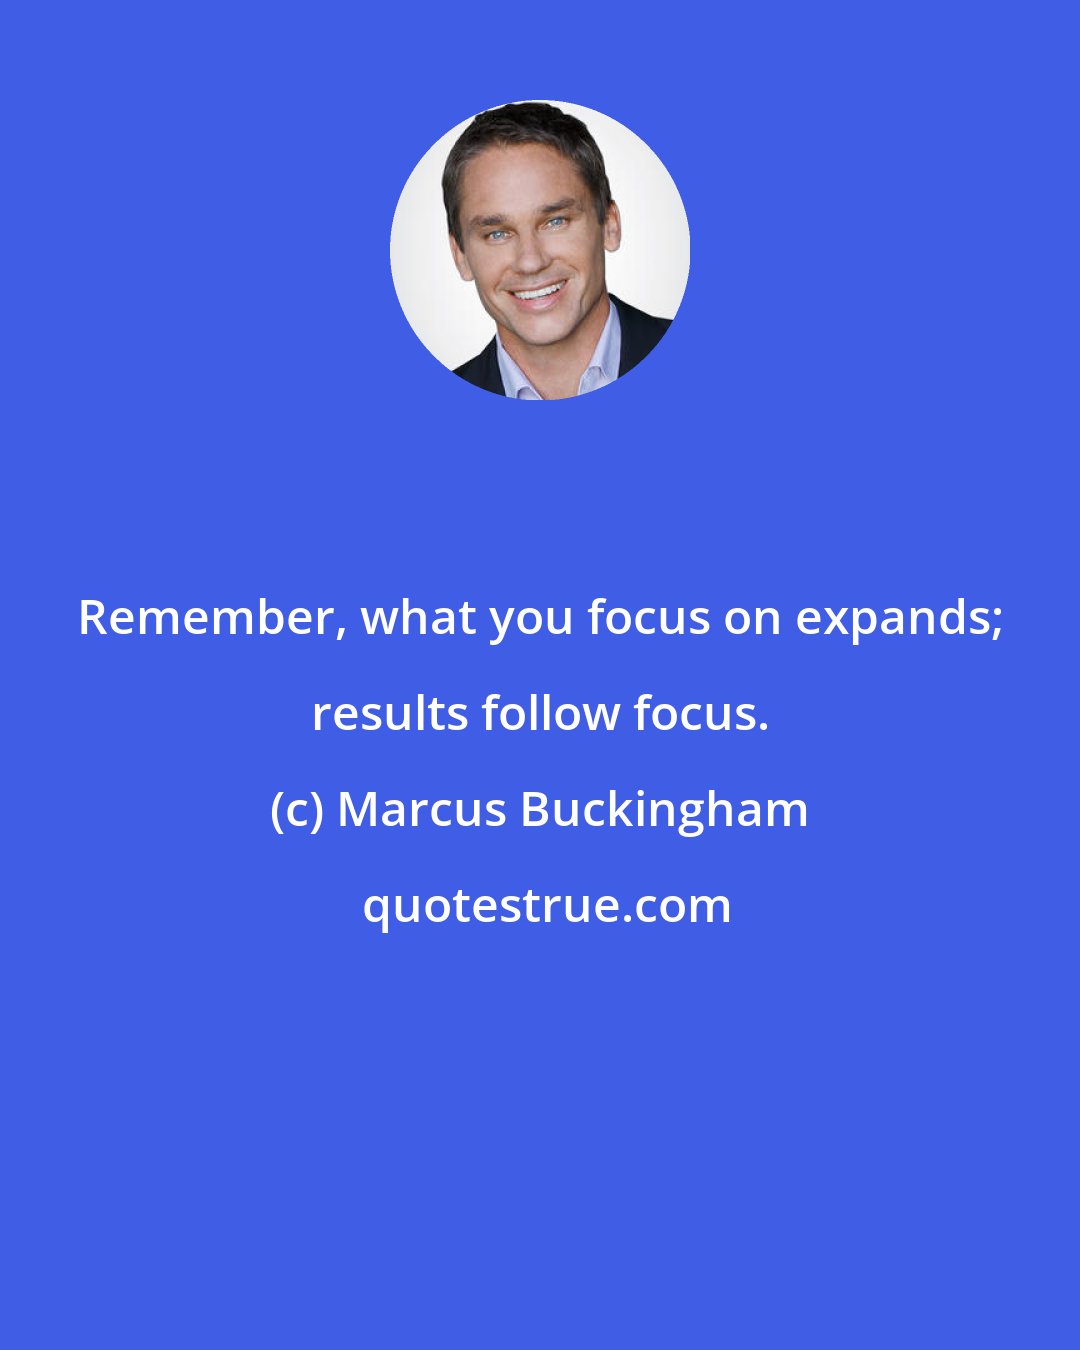 Marcus Buckingham: Remember, what you focus on expands; results follow focus.